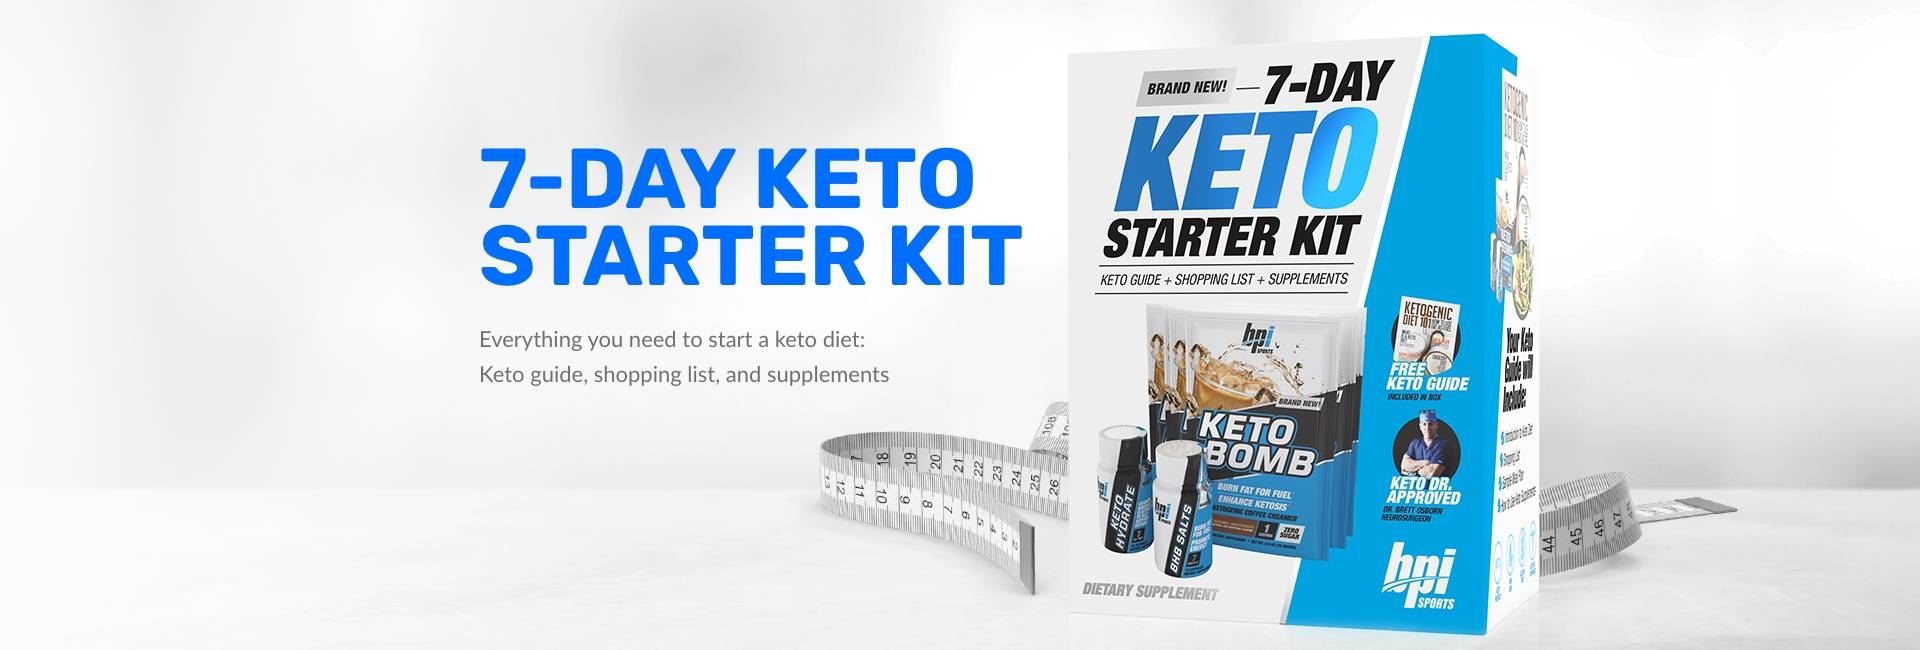 The 7-Day Keto Starter kit, all you need to start your keto diet